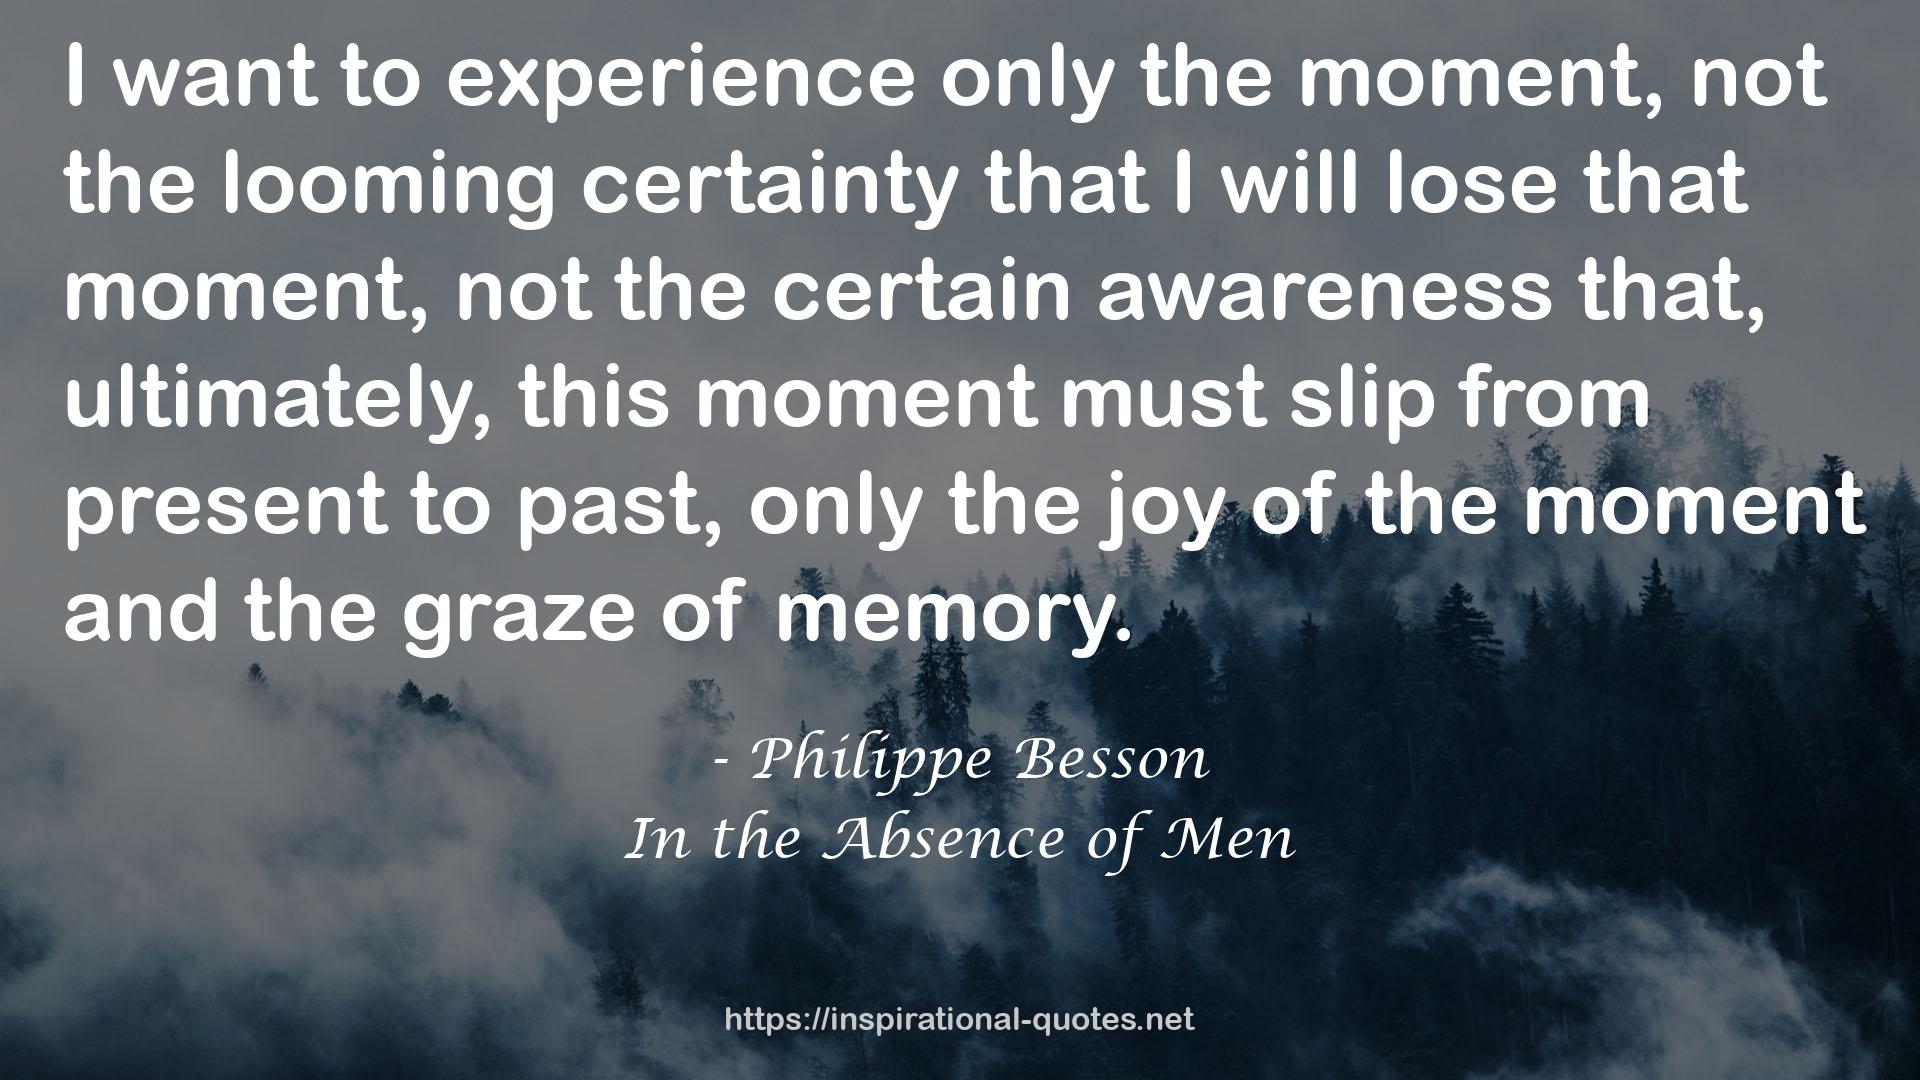 In the Absence of Men QUOTES